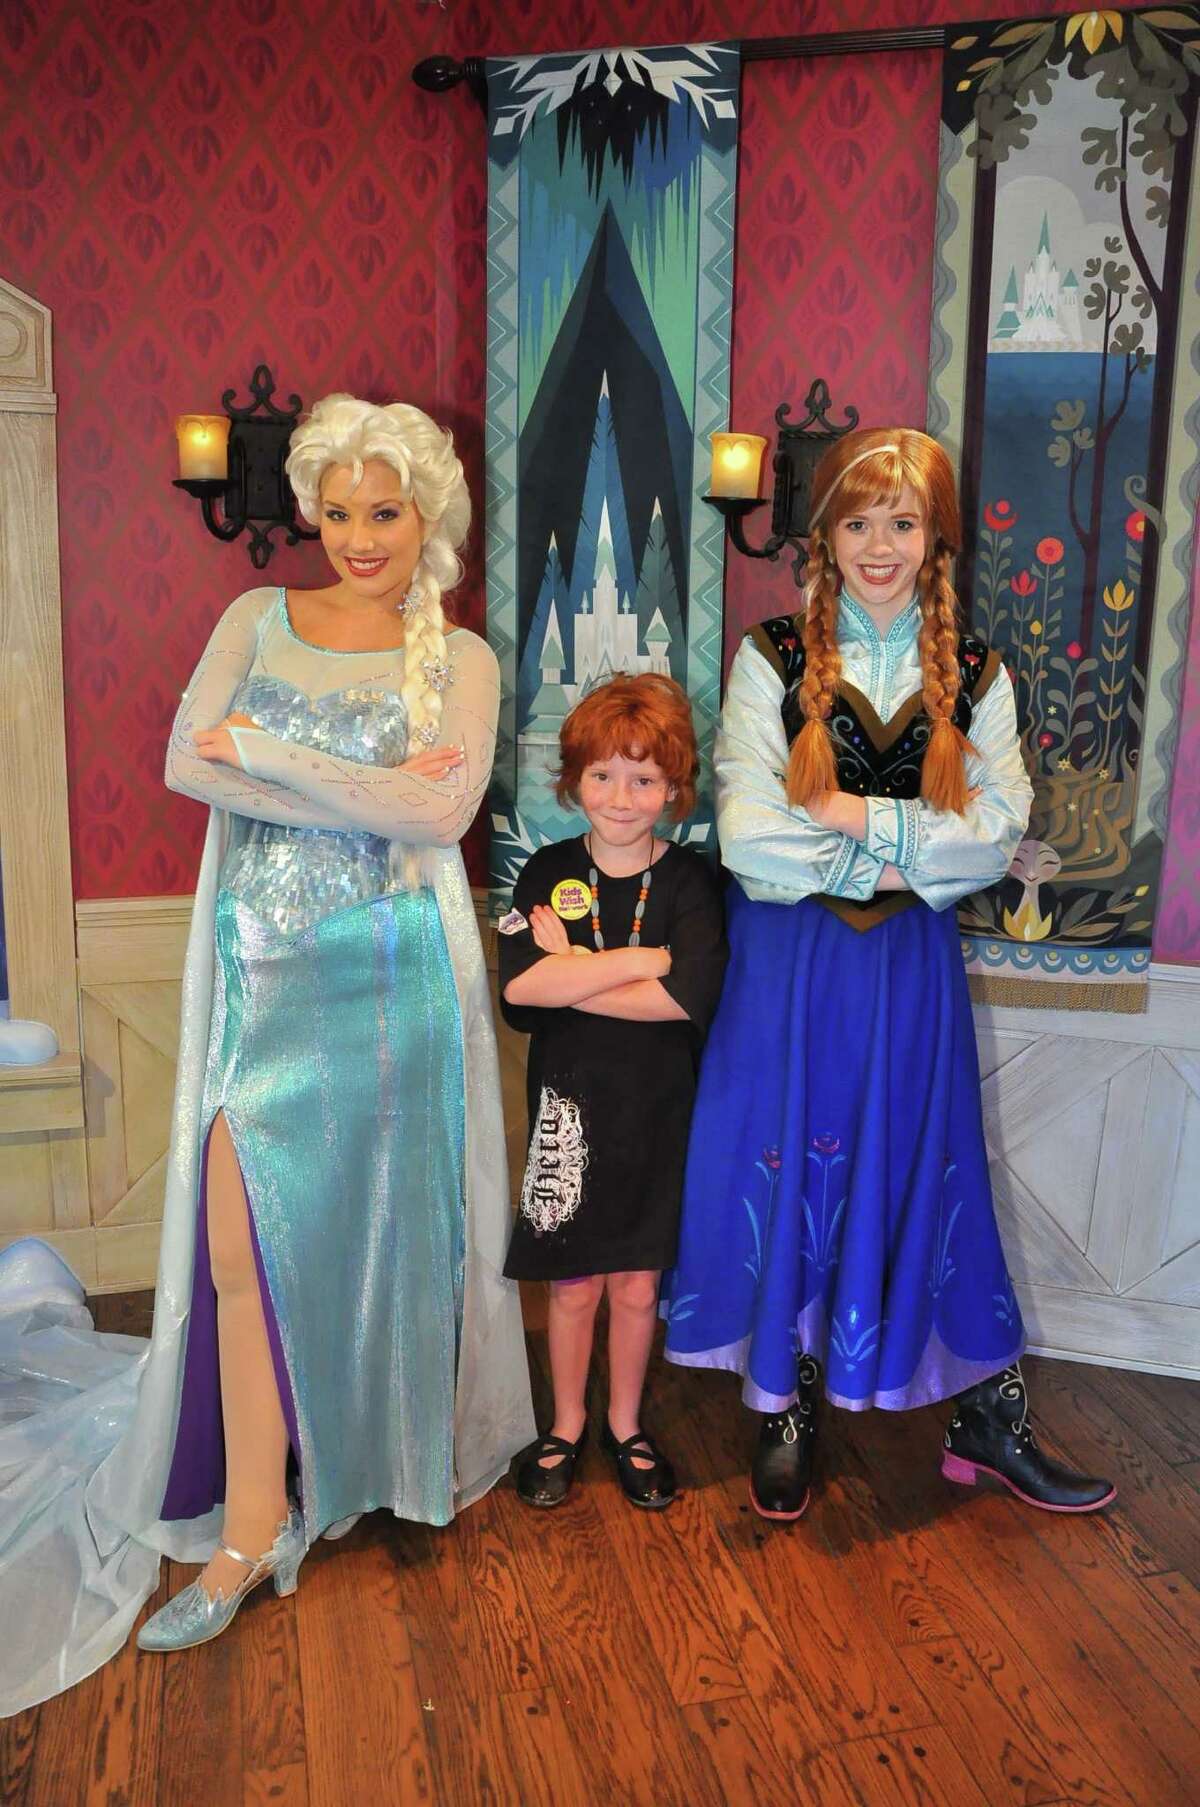 Emileigh Marsh (center) with Elsa and Ana impersonators from the movie Frozen at Disneyland in California.